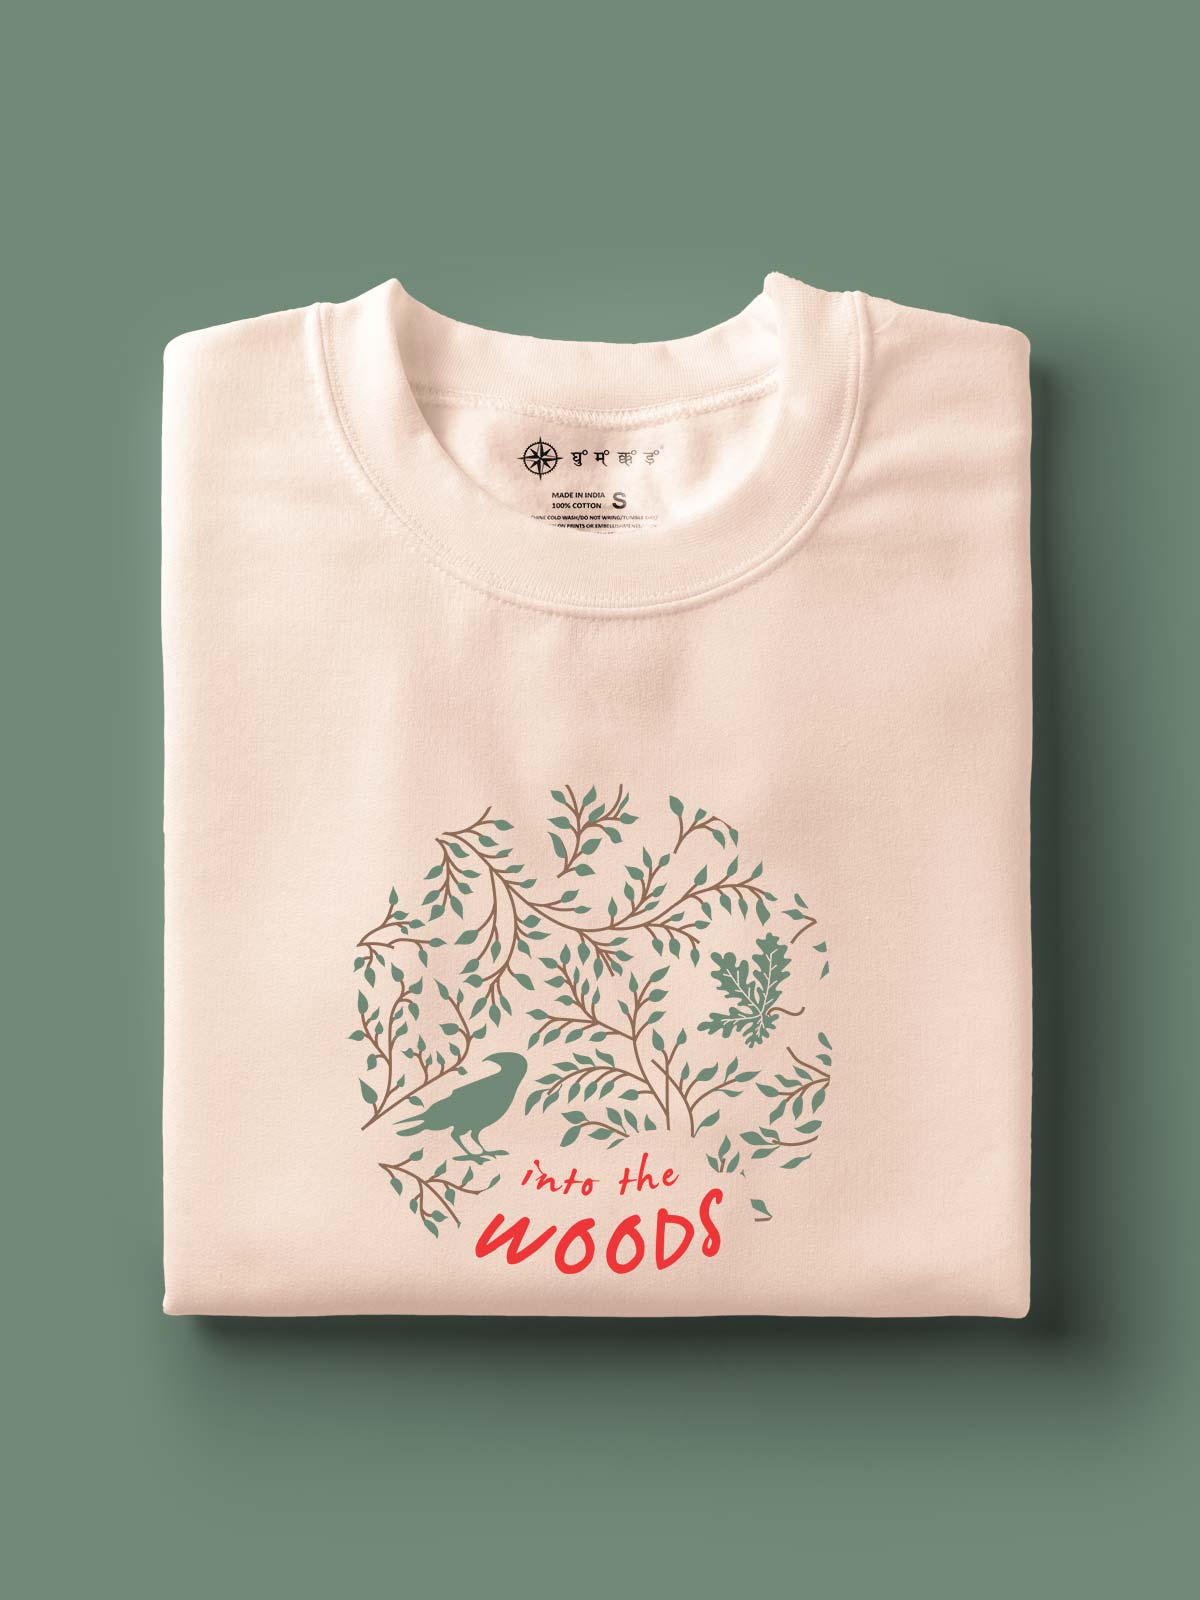 Into-the-woods-printed-t-shirt-for-men by Ghumakkad